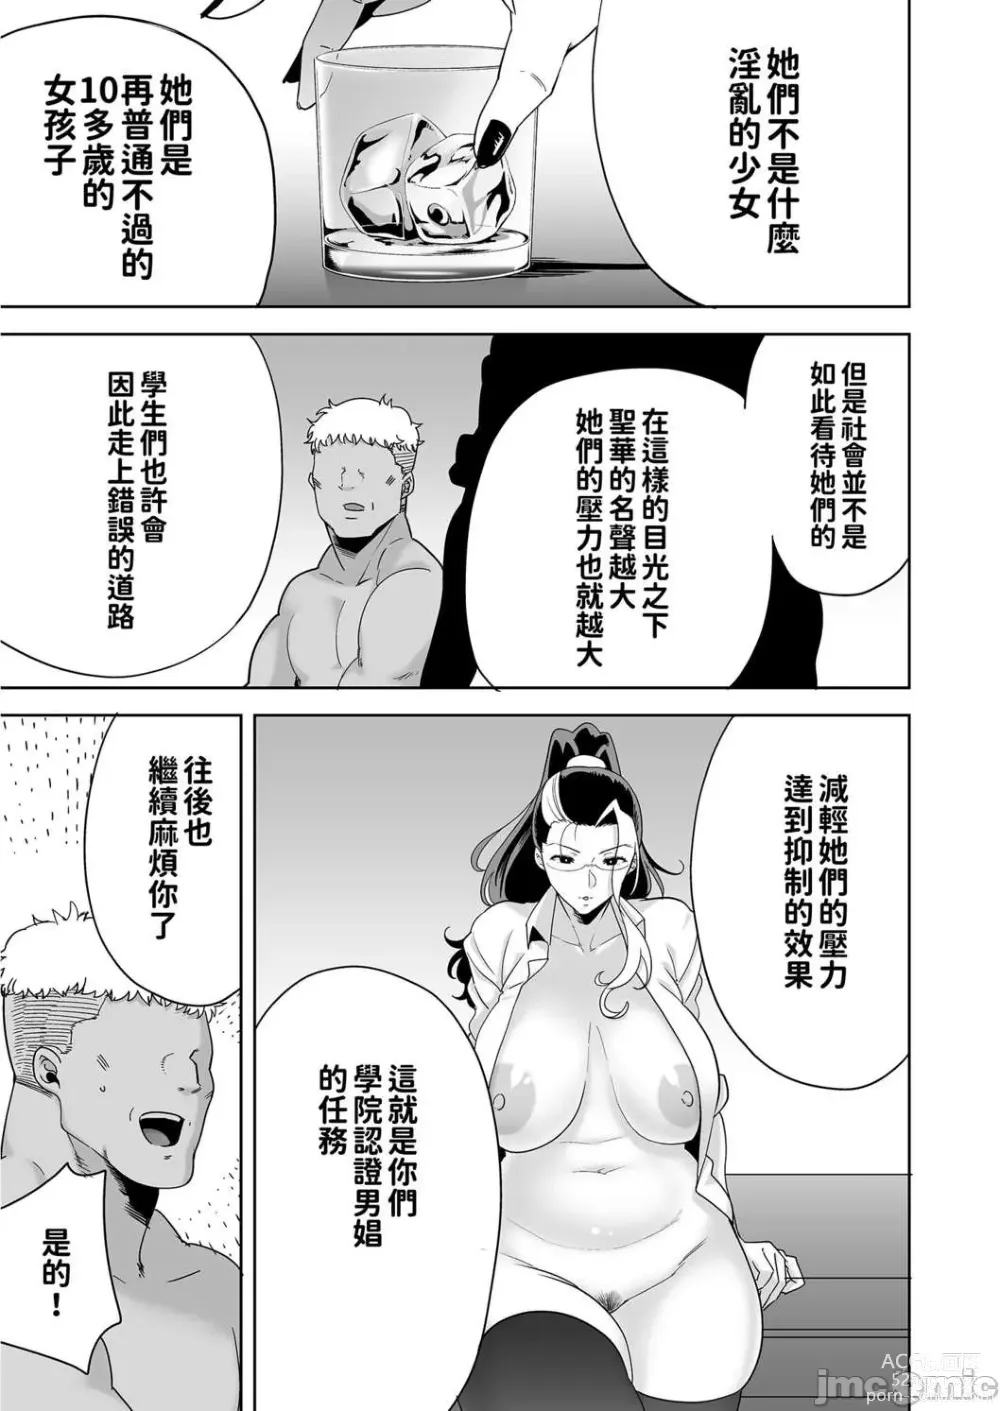 Page 53 of doujinshi 聖華女学院高等部公認竿おじさん 5